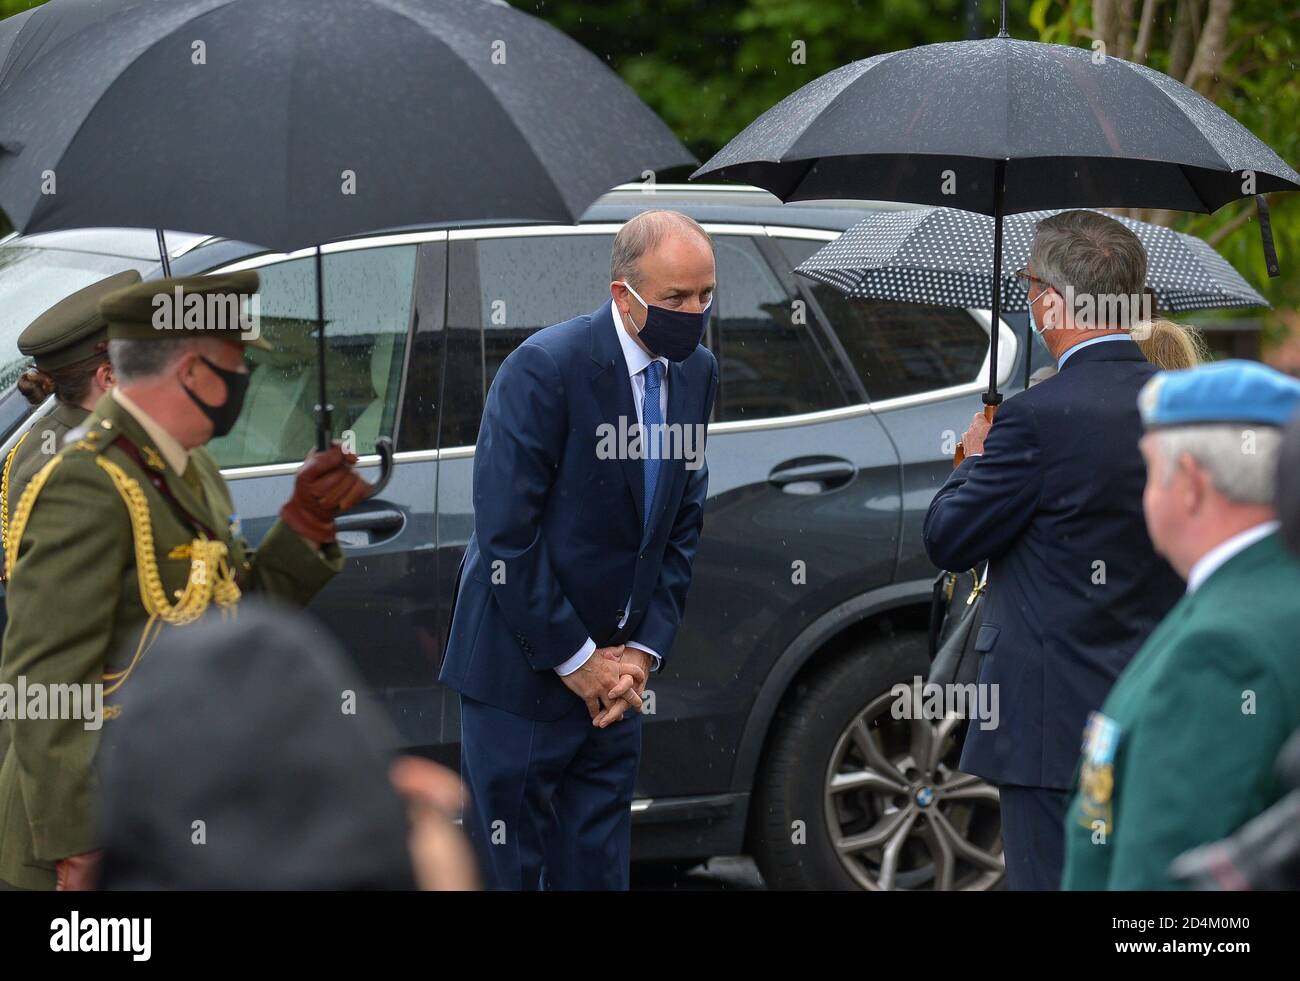 Irish Taoiseach Micheál Martin wearing a face mask at the funeral of John Hume in Derry. ©George Sweeney / Alamy Stock Photo Stock Photo